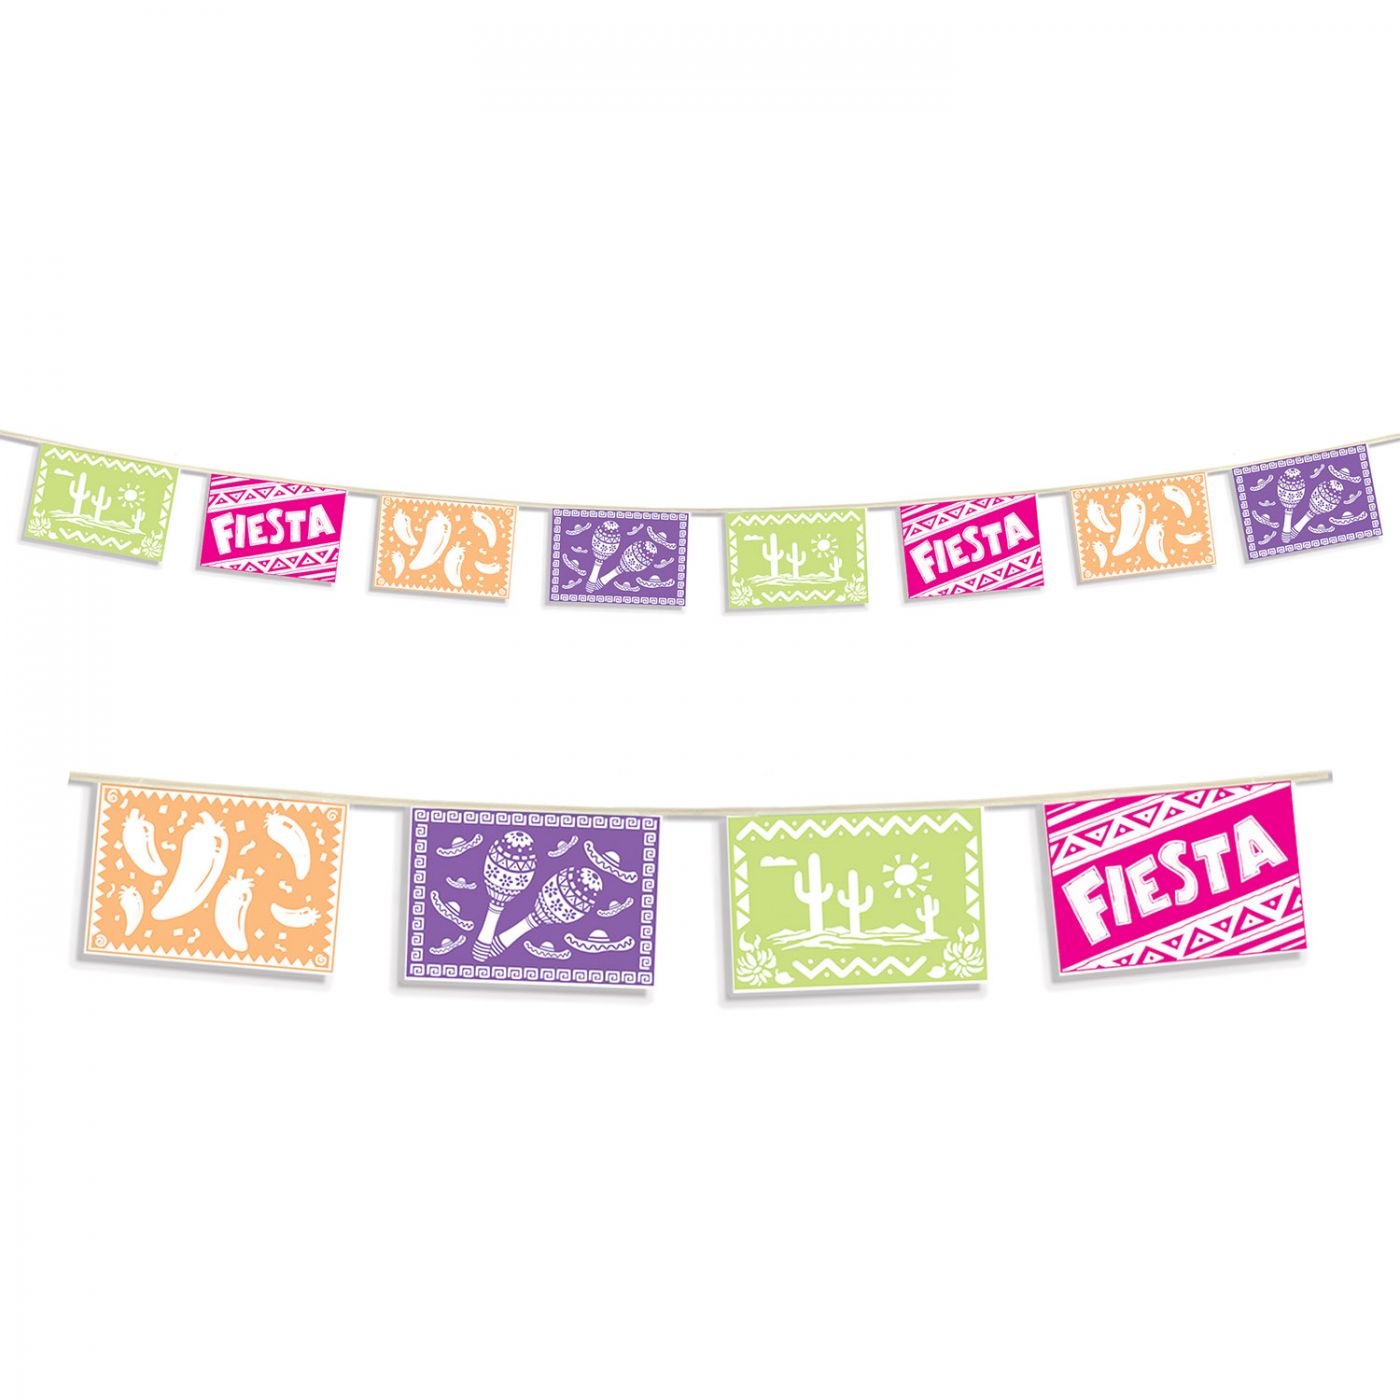 Fiesta Picado Style Pennant Banner (12) image